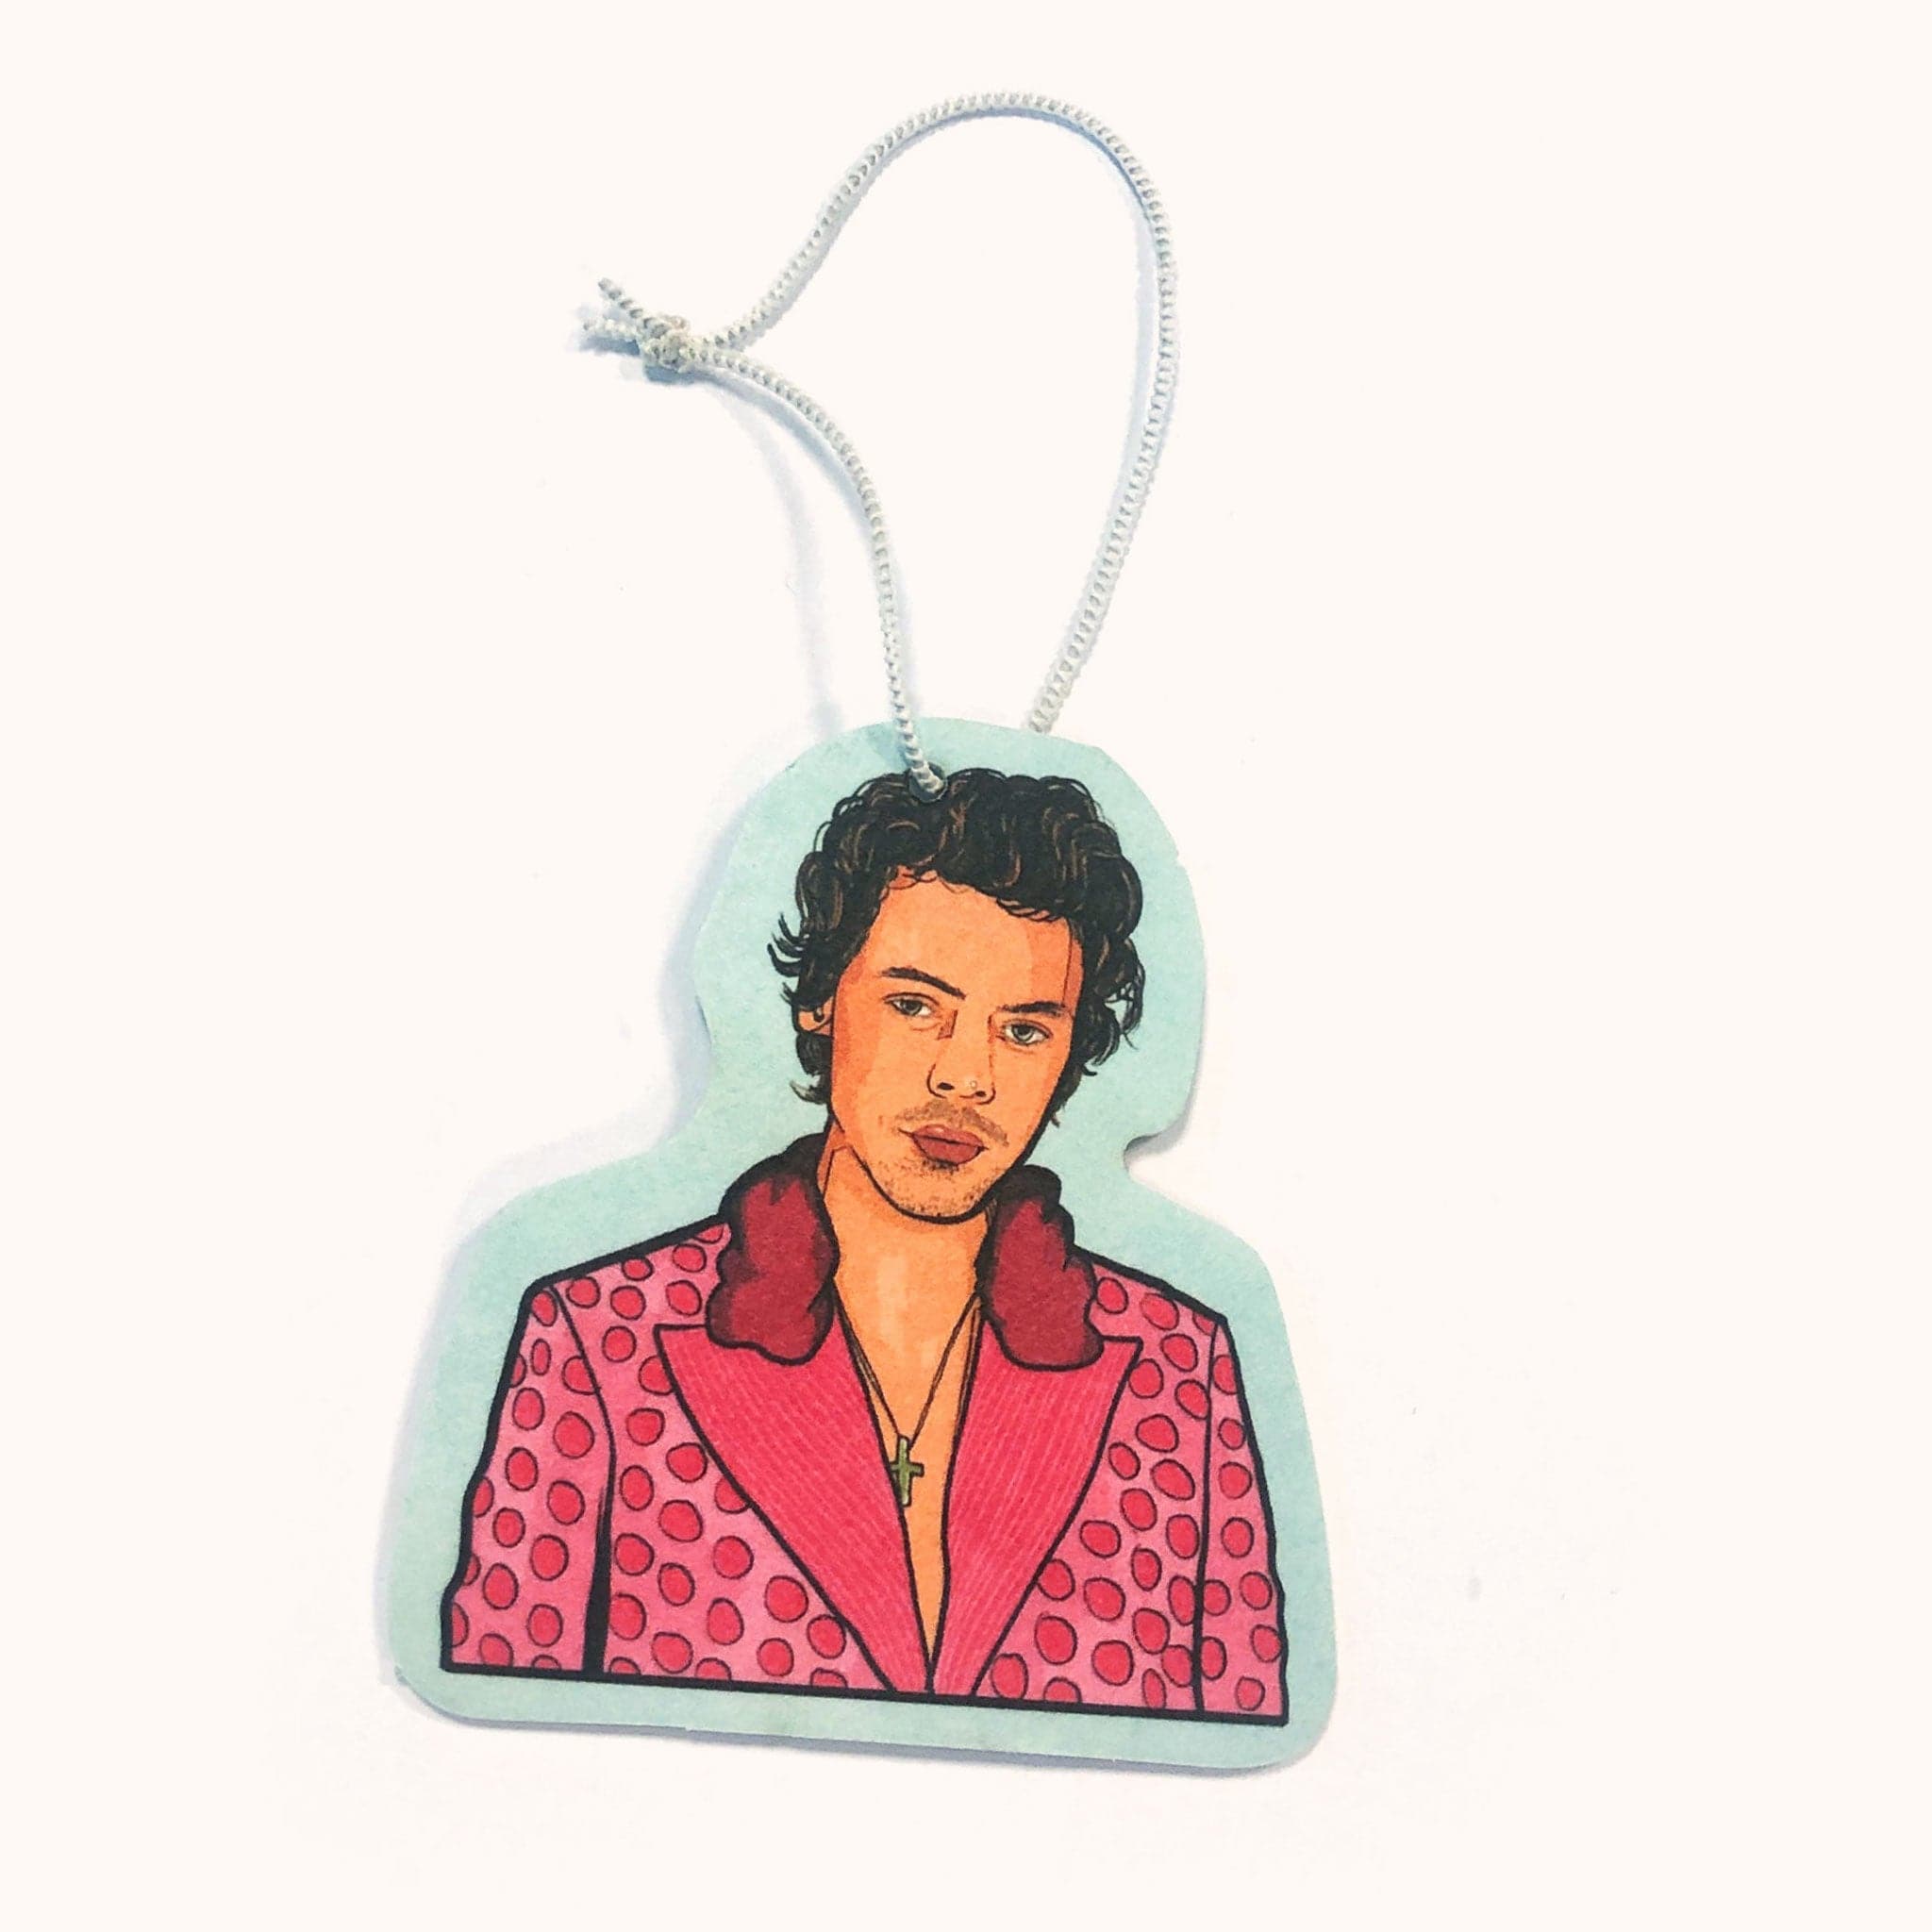 Light aqua air freshener with display the top half of Harry Styles wearing an iconic pink polo dot suit and cross necklace. A white elastic loop is fastened above ready to be hung. 